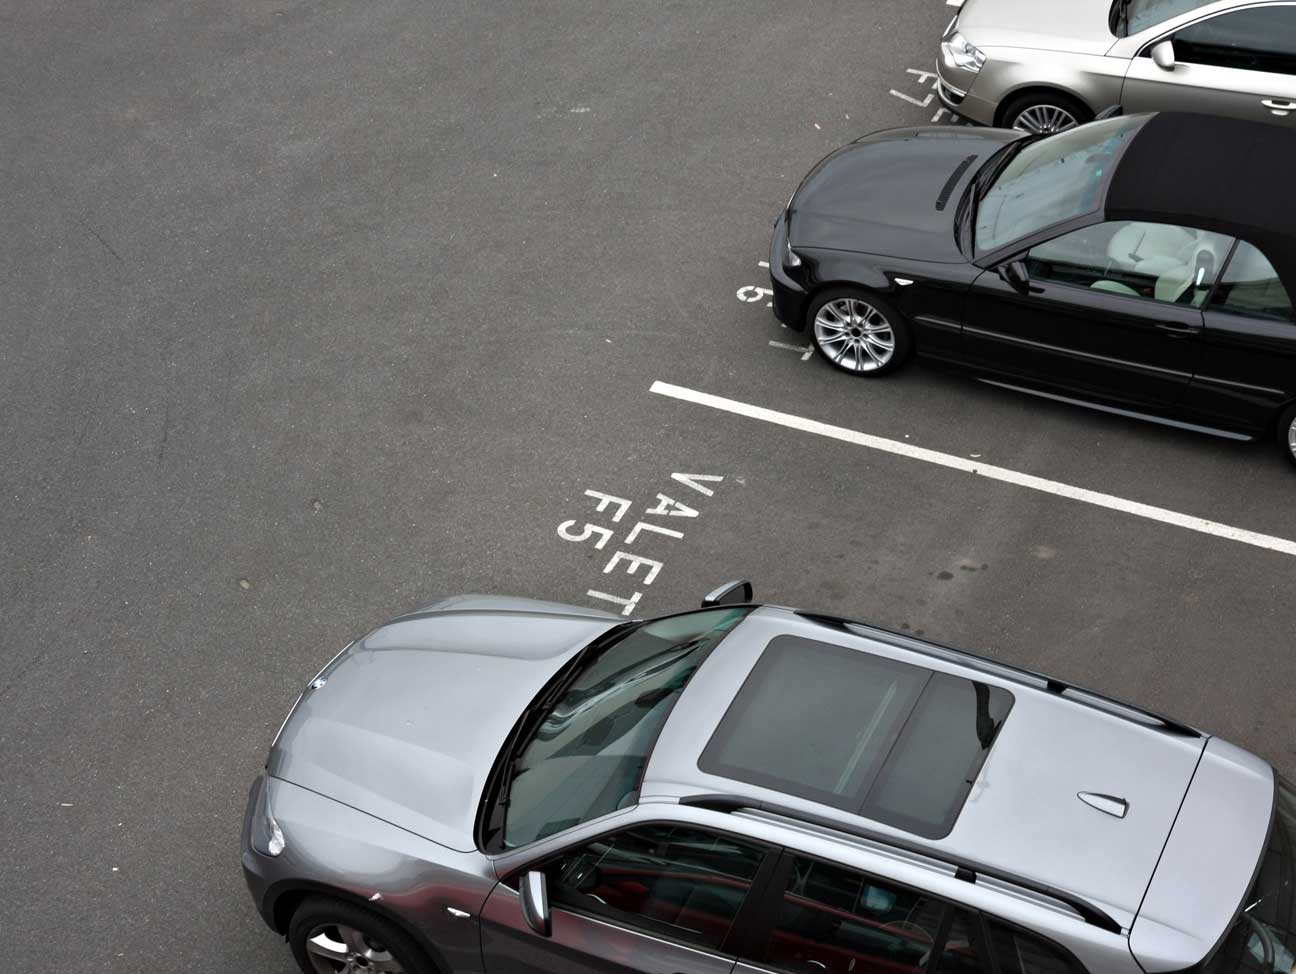 The essential parking guide for all Singaporeans